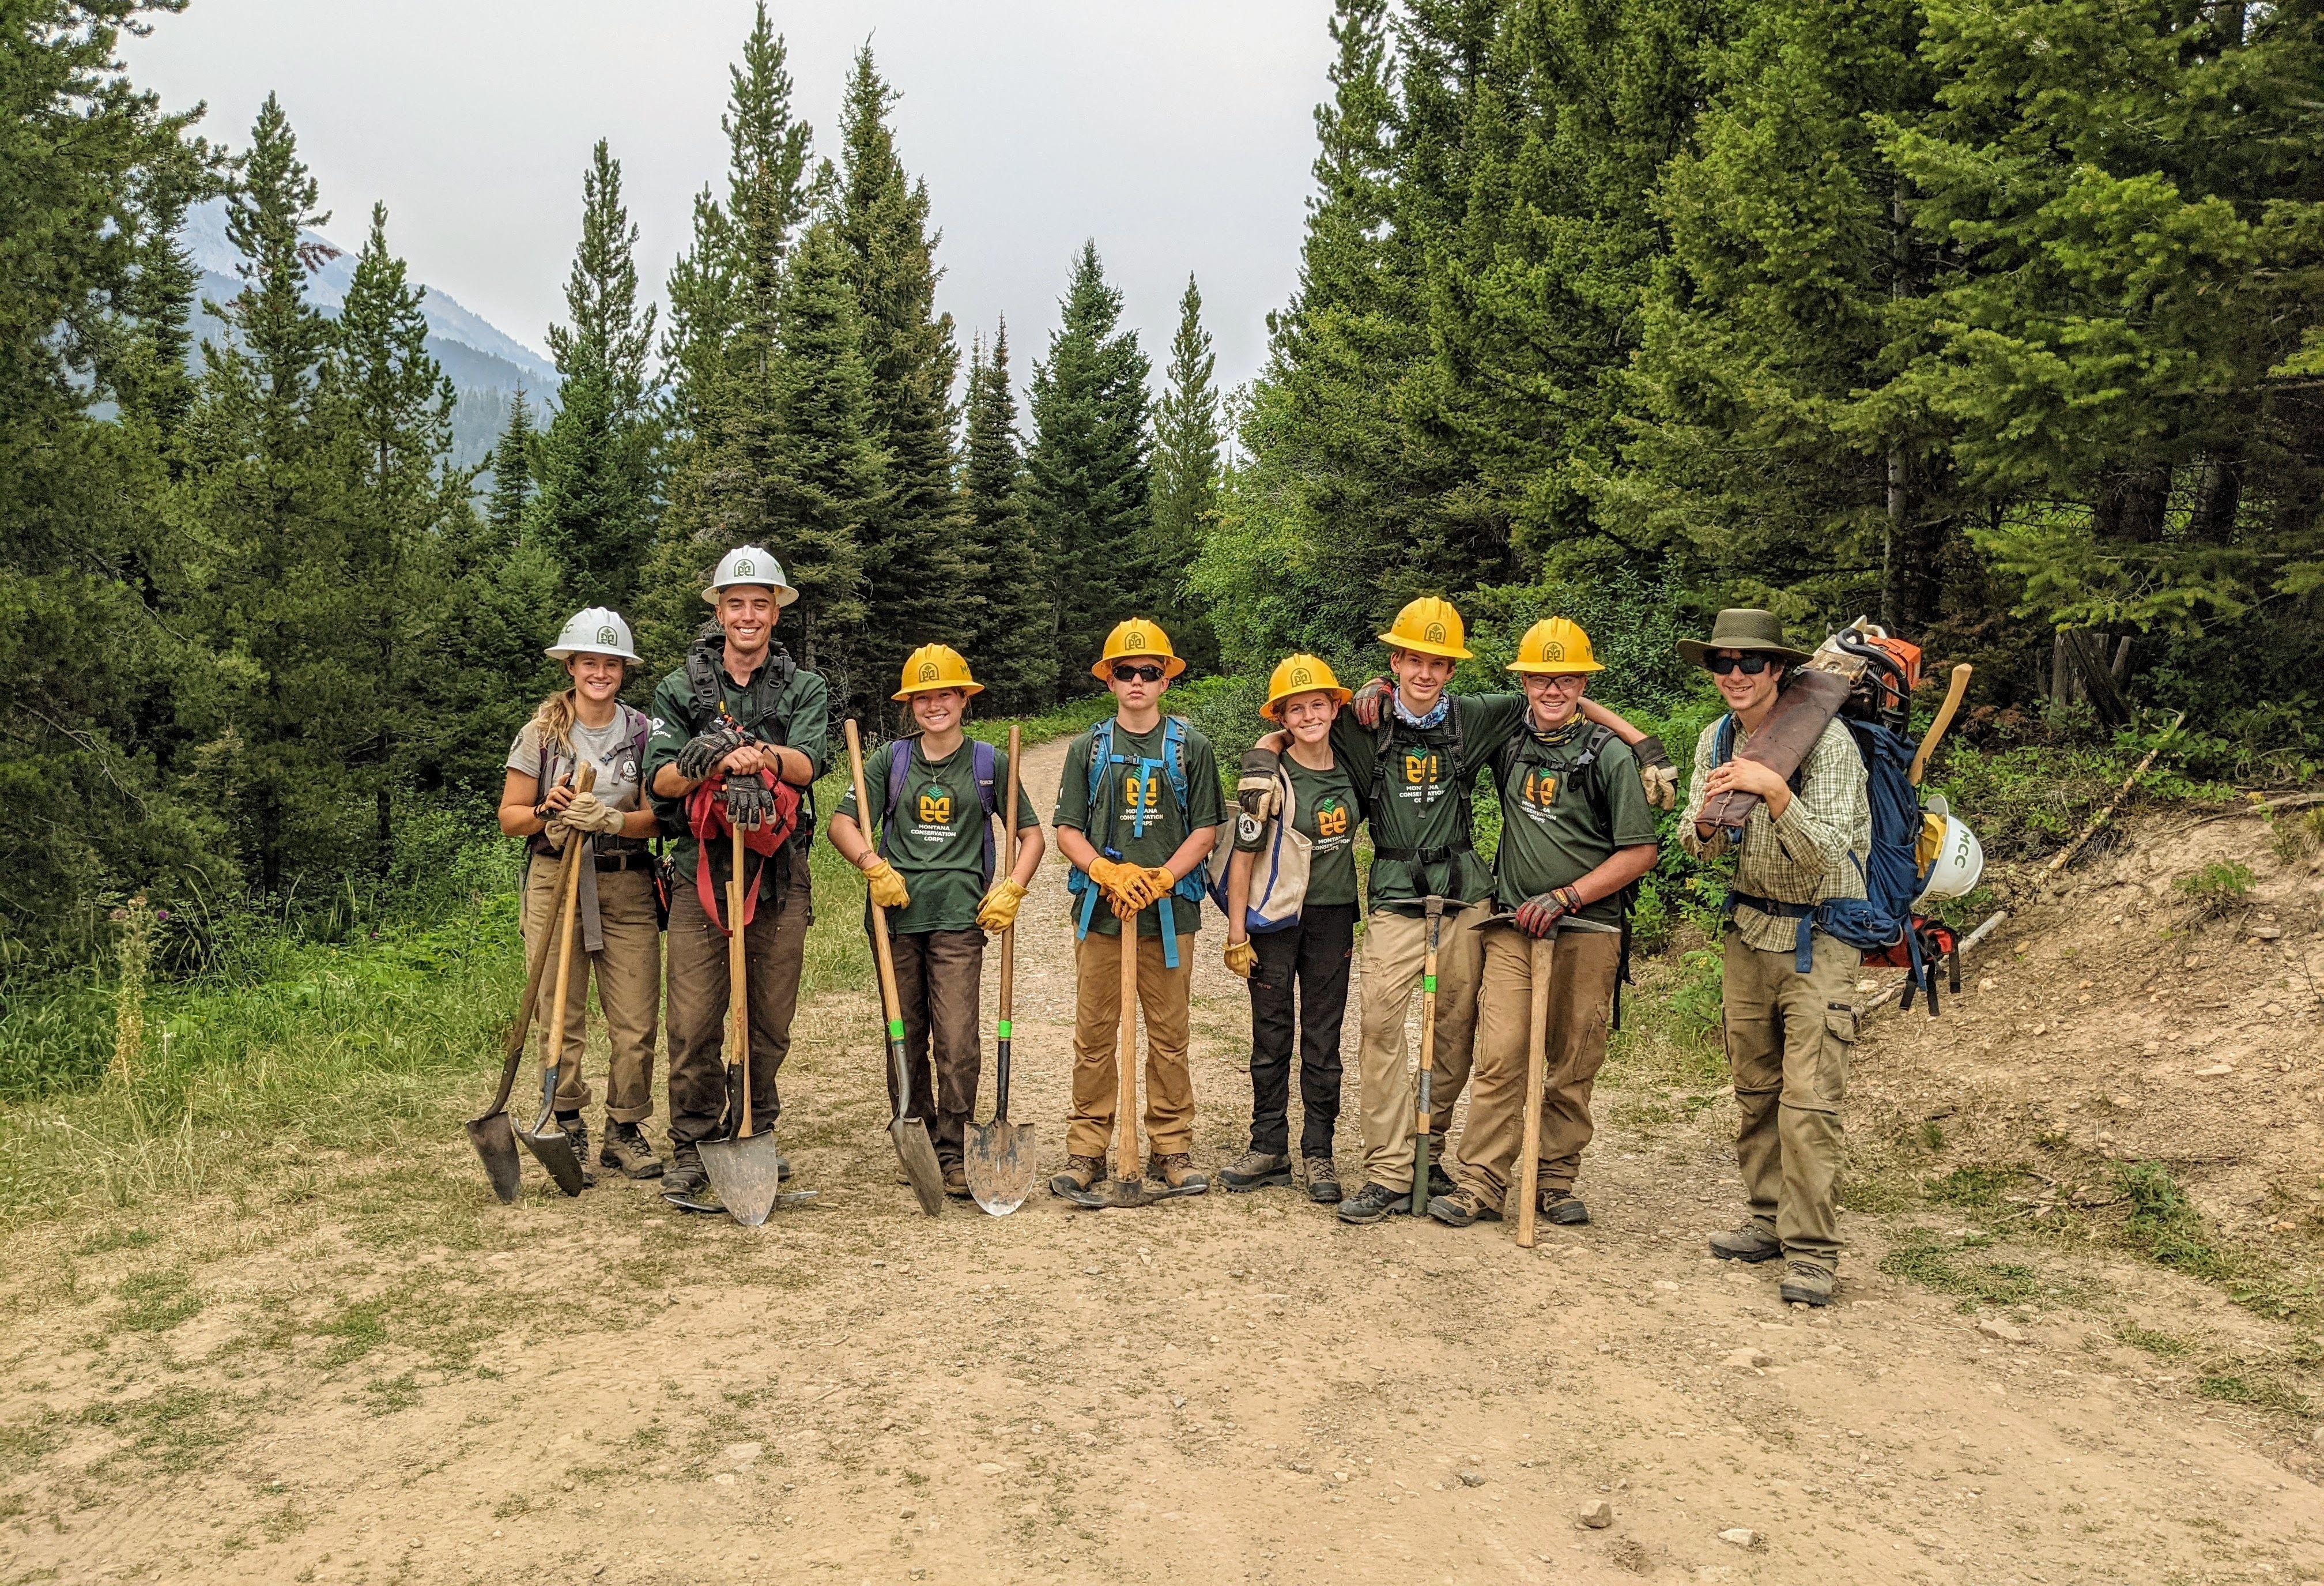 [Image Description: Eight MCC members standing together on a trail wearing their uniforms and helmets, holding shovels and pulaskis. Five of the members are youth, standing alongside their expedition leaders.]